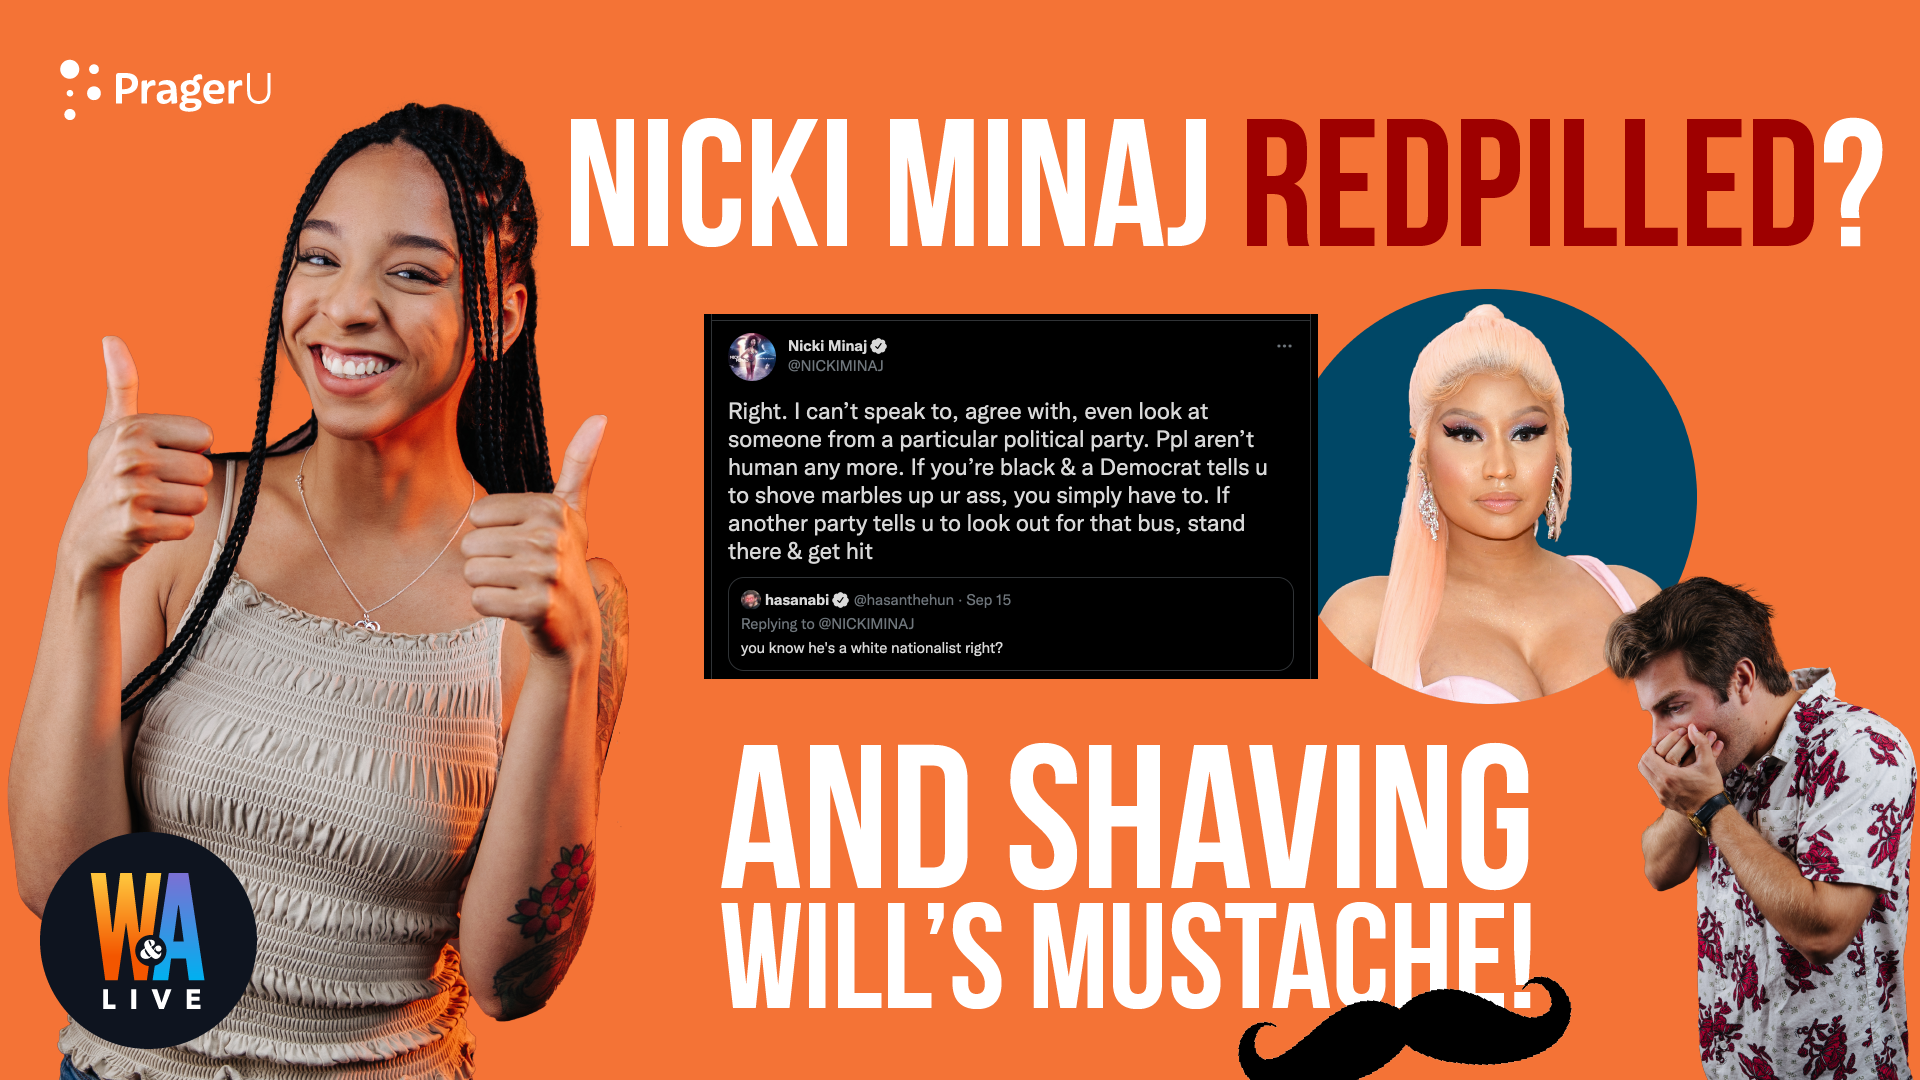 Nicki Minaj Takes on Mob: ‘We’re No Longer Even Allowed to Voice Our Opinions?': 9/16/2021